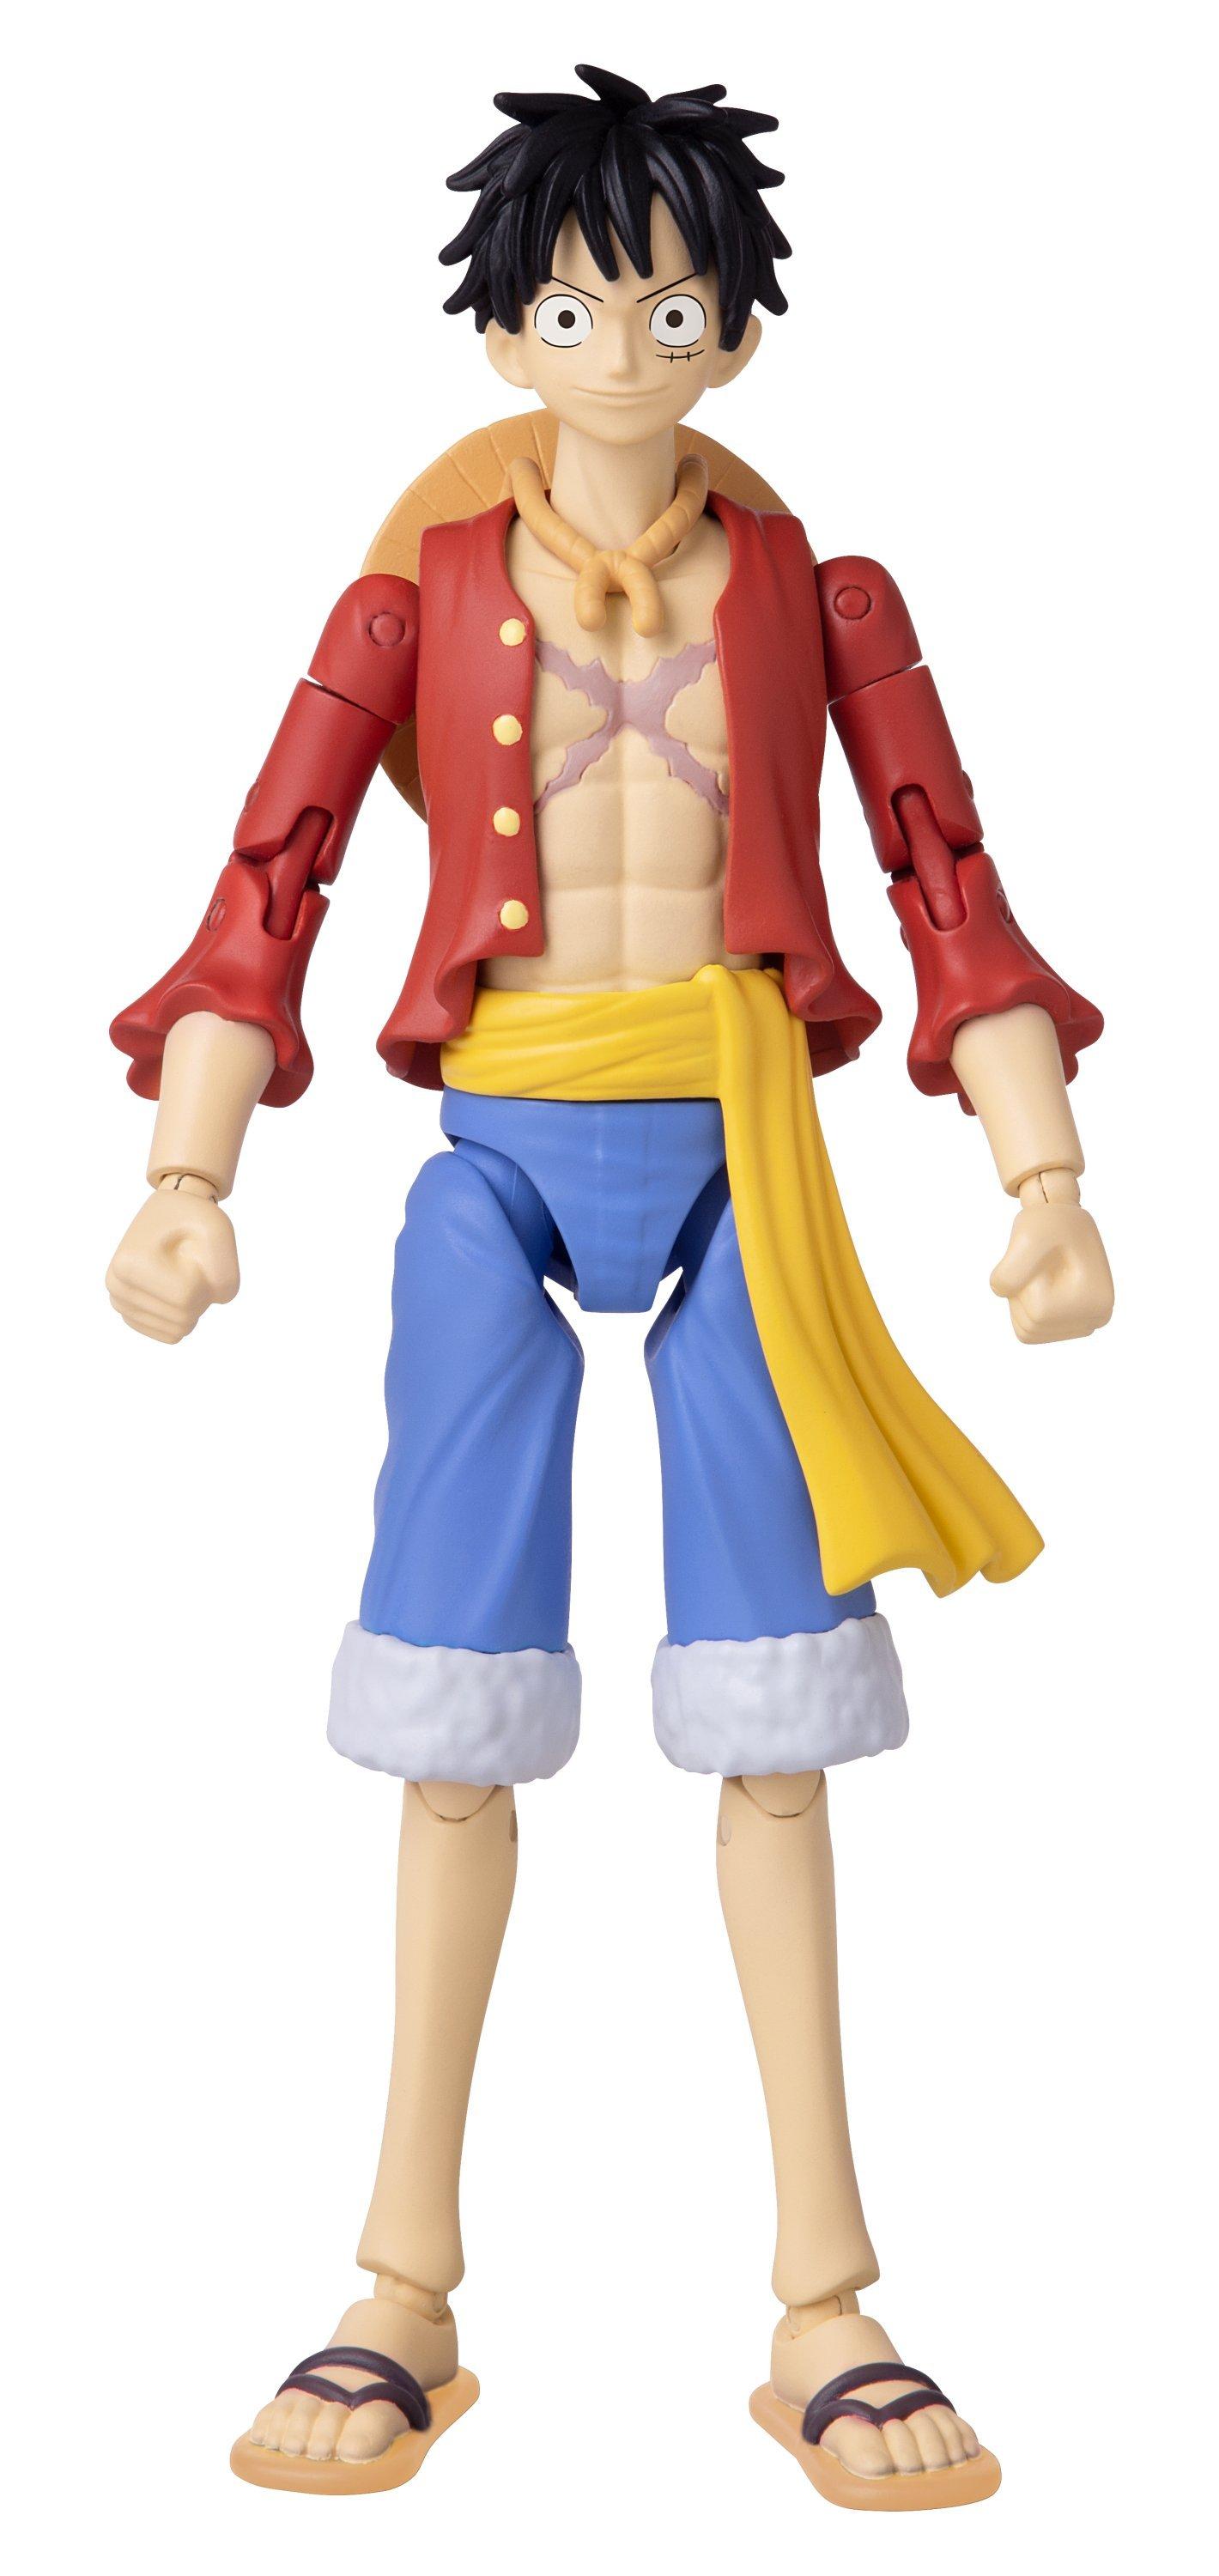 Download One Piece Luffy Anime Heroes Action Figure Gamestop